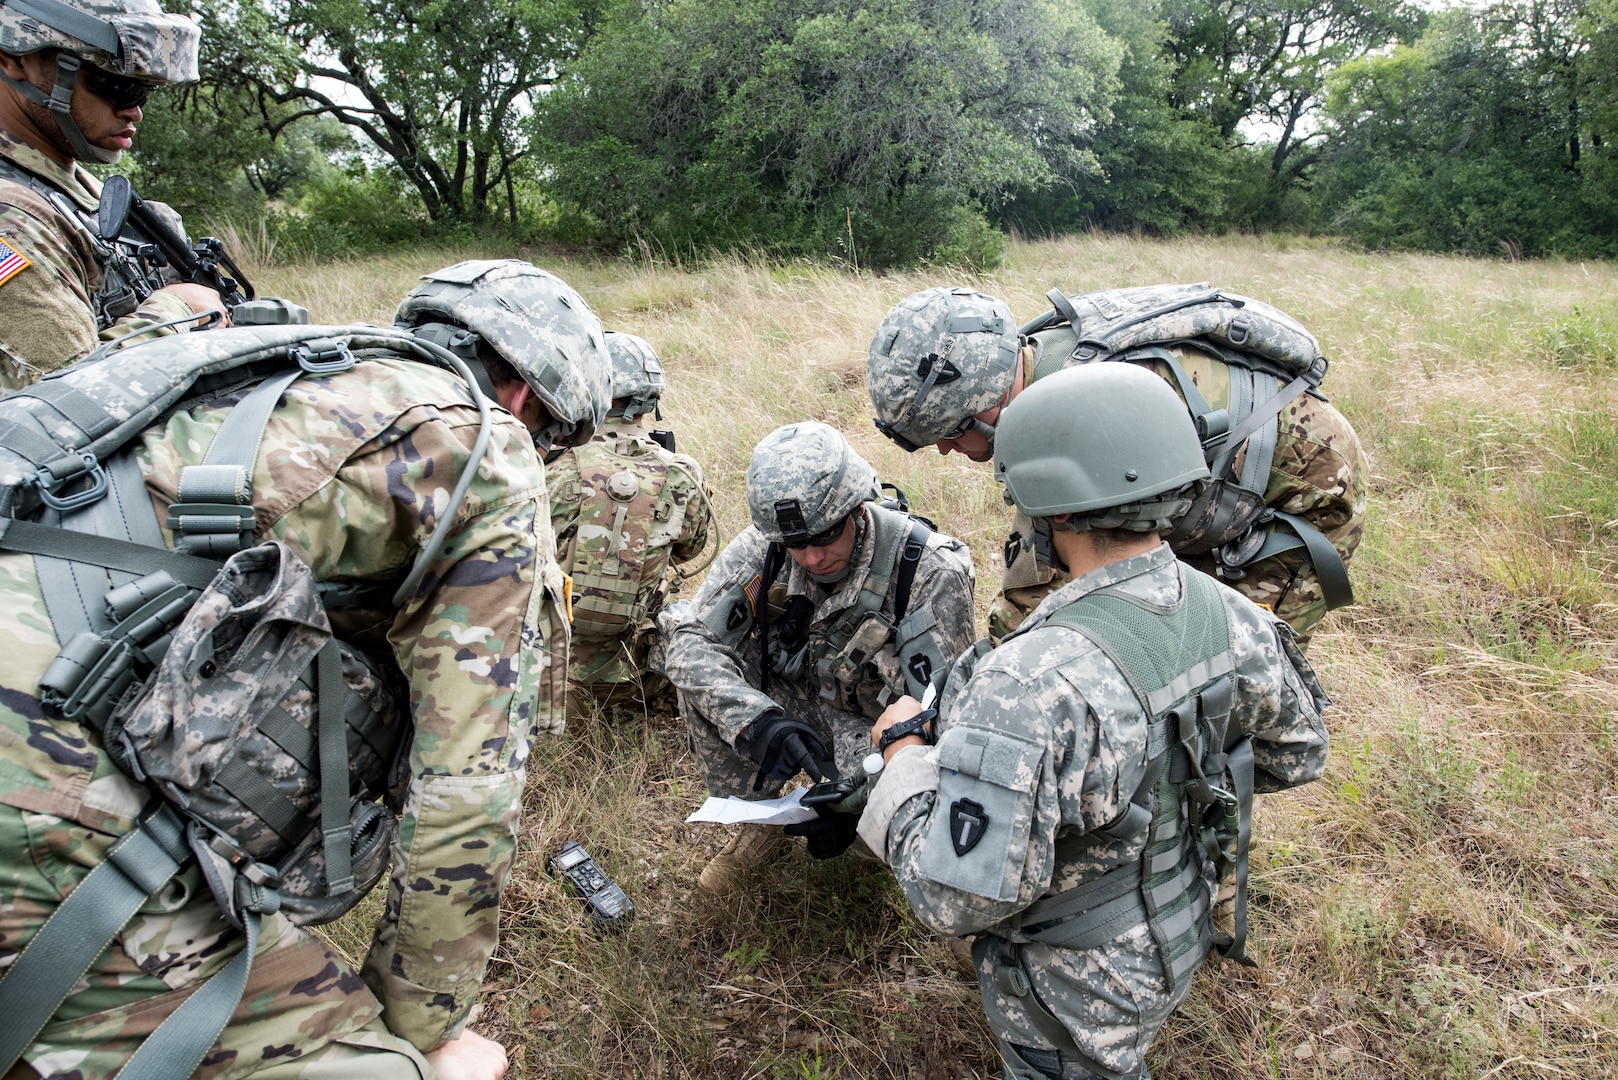 Army Capt. Robert Ratliff, Texas Army National Guard Company C, 2-149 Aviation platoon leader, uses a map to lead a downed aircrew to their extraction point as part of a personnel recovery mission during Operation Lone Star Vigilance, a joint, total force exercise, June 15, 2018, at Joint Base San Antonio-Camp Bullis, Texas. Operation Lone Star Vigilance was a joint-training exercise involving Active-Duty and Reserve Airmen and Soldiers from the Texas Army National Guard from installations across San Antonio. The multi-service missions saw the successful completion of aerial reconnaissance, sling loading of cargo, MEDEVAC hoists, personnel recovery and the simultaneous operation of multiple helicopter landing zones. (U.S. Air Force photo by Senior Airman Stormy Archer)